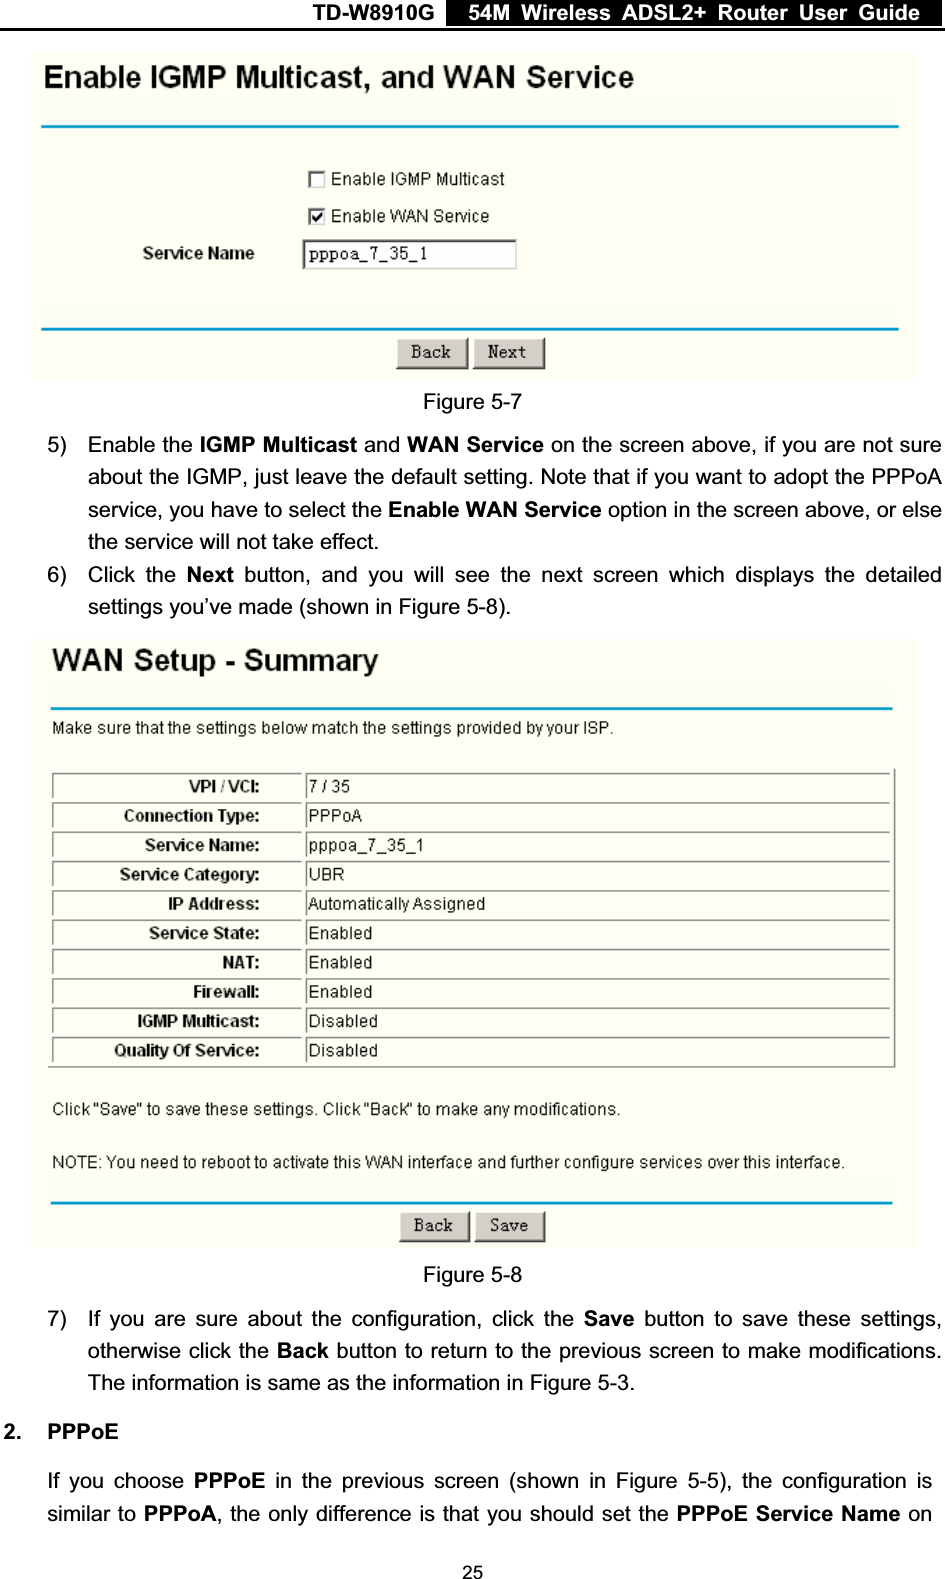 TD-W8910G    54M Wireless ADSL2+ Router User Guide  Figure 5-7 5) Enable the IGMP Multicast and WAN Service on the screen above, if you are not sure about the IGMP, just leave the default setting. Note that if you want to adopt the PPPoA service, you have to select the Enable WAN Service option in the screen above, or else the service will not take effect. 6) Click the Next button, and you will see the next screen which displays the detailed settings you’ve made (shown in Figure 5-8).Figure 5-8 7)  If you are sure about the configuration, click the Save button to save these settings, otherwise click the Back button to return to the previous screen to make modifications. The information is same as the information in Figure 5-3.2. PPPoE If you choose PPPoE in the previous screen (shown in Figure 5-5), the configuration is similar to PPPoA, the only difference is that you should set the PPPoE Service Name on  25